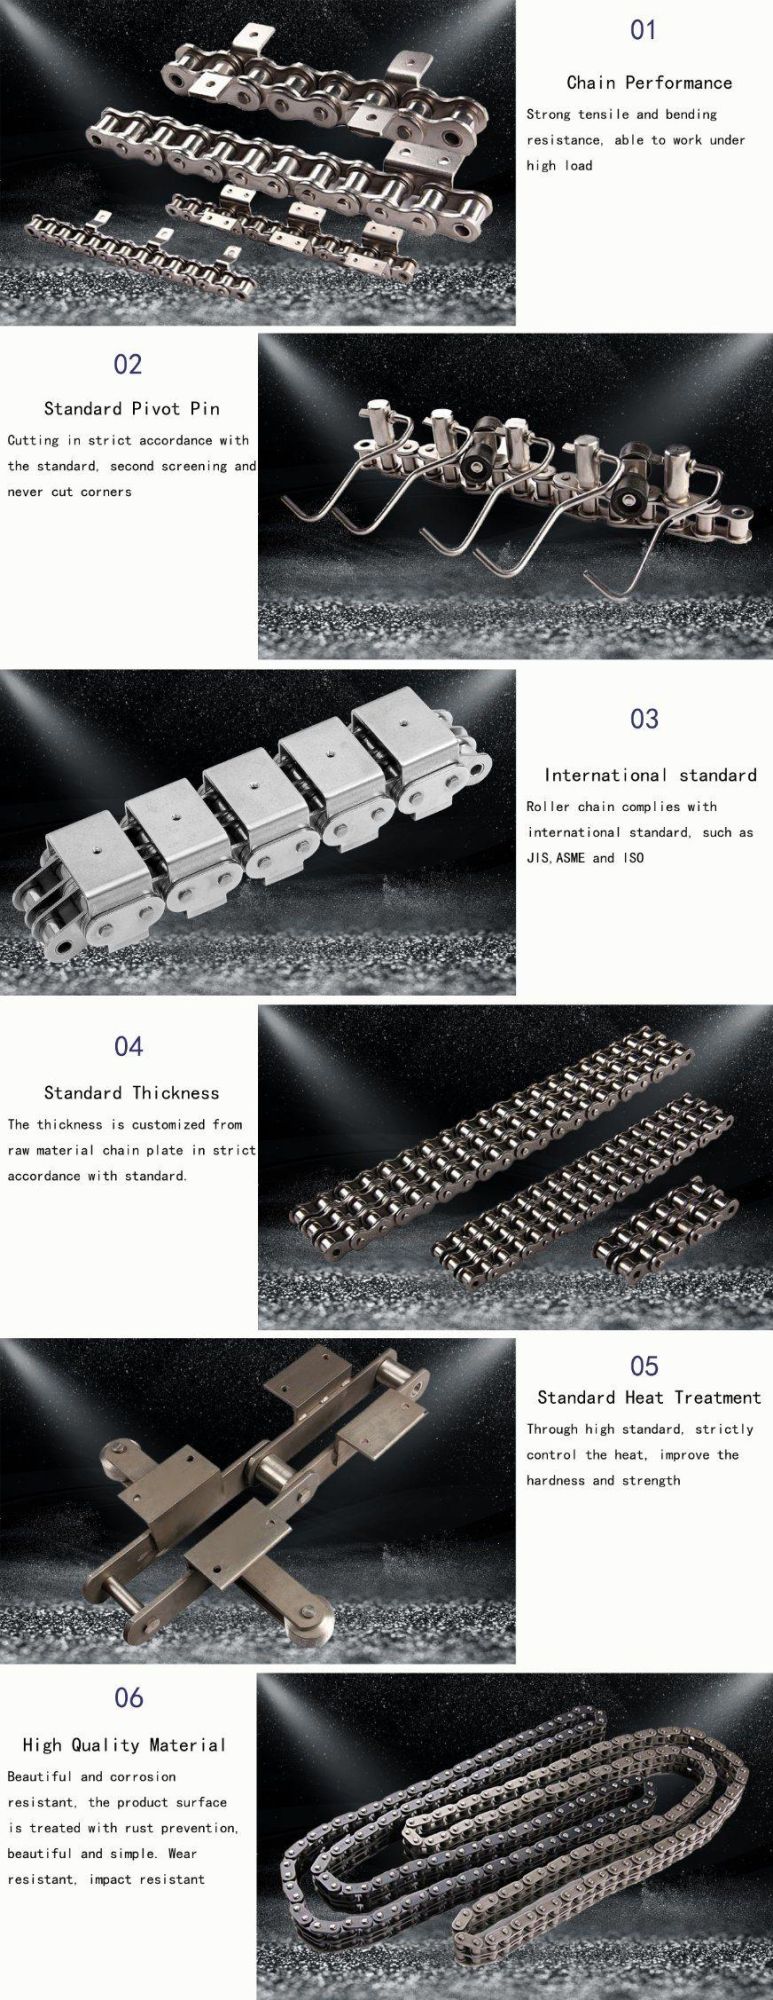 9.5250 06b 06c Stainless Steel Short Pitch Conveyor Roller Chain with Attachment SA-1 Sk-1